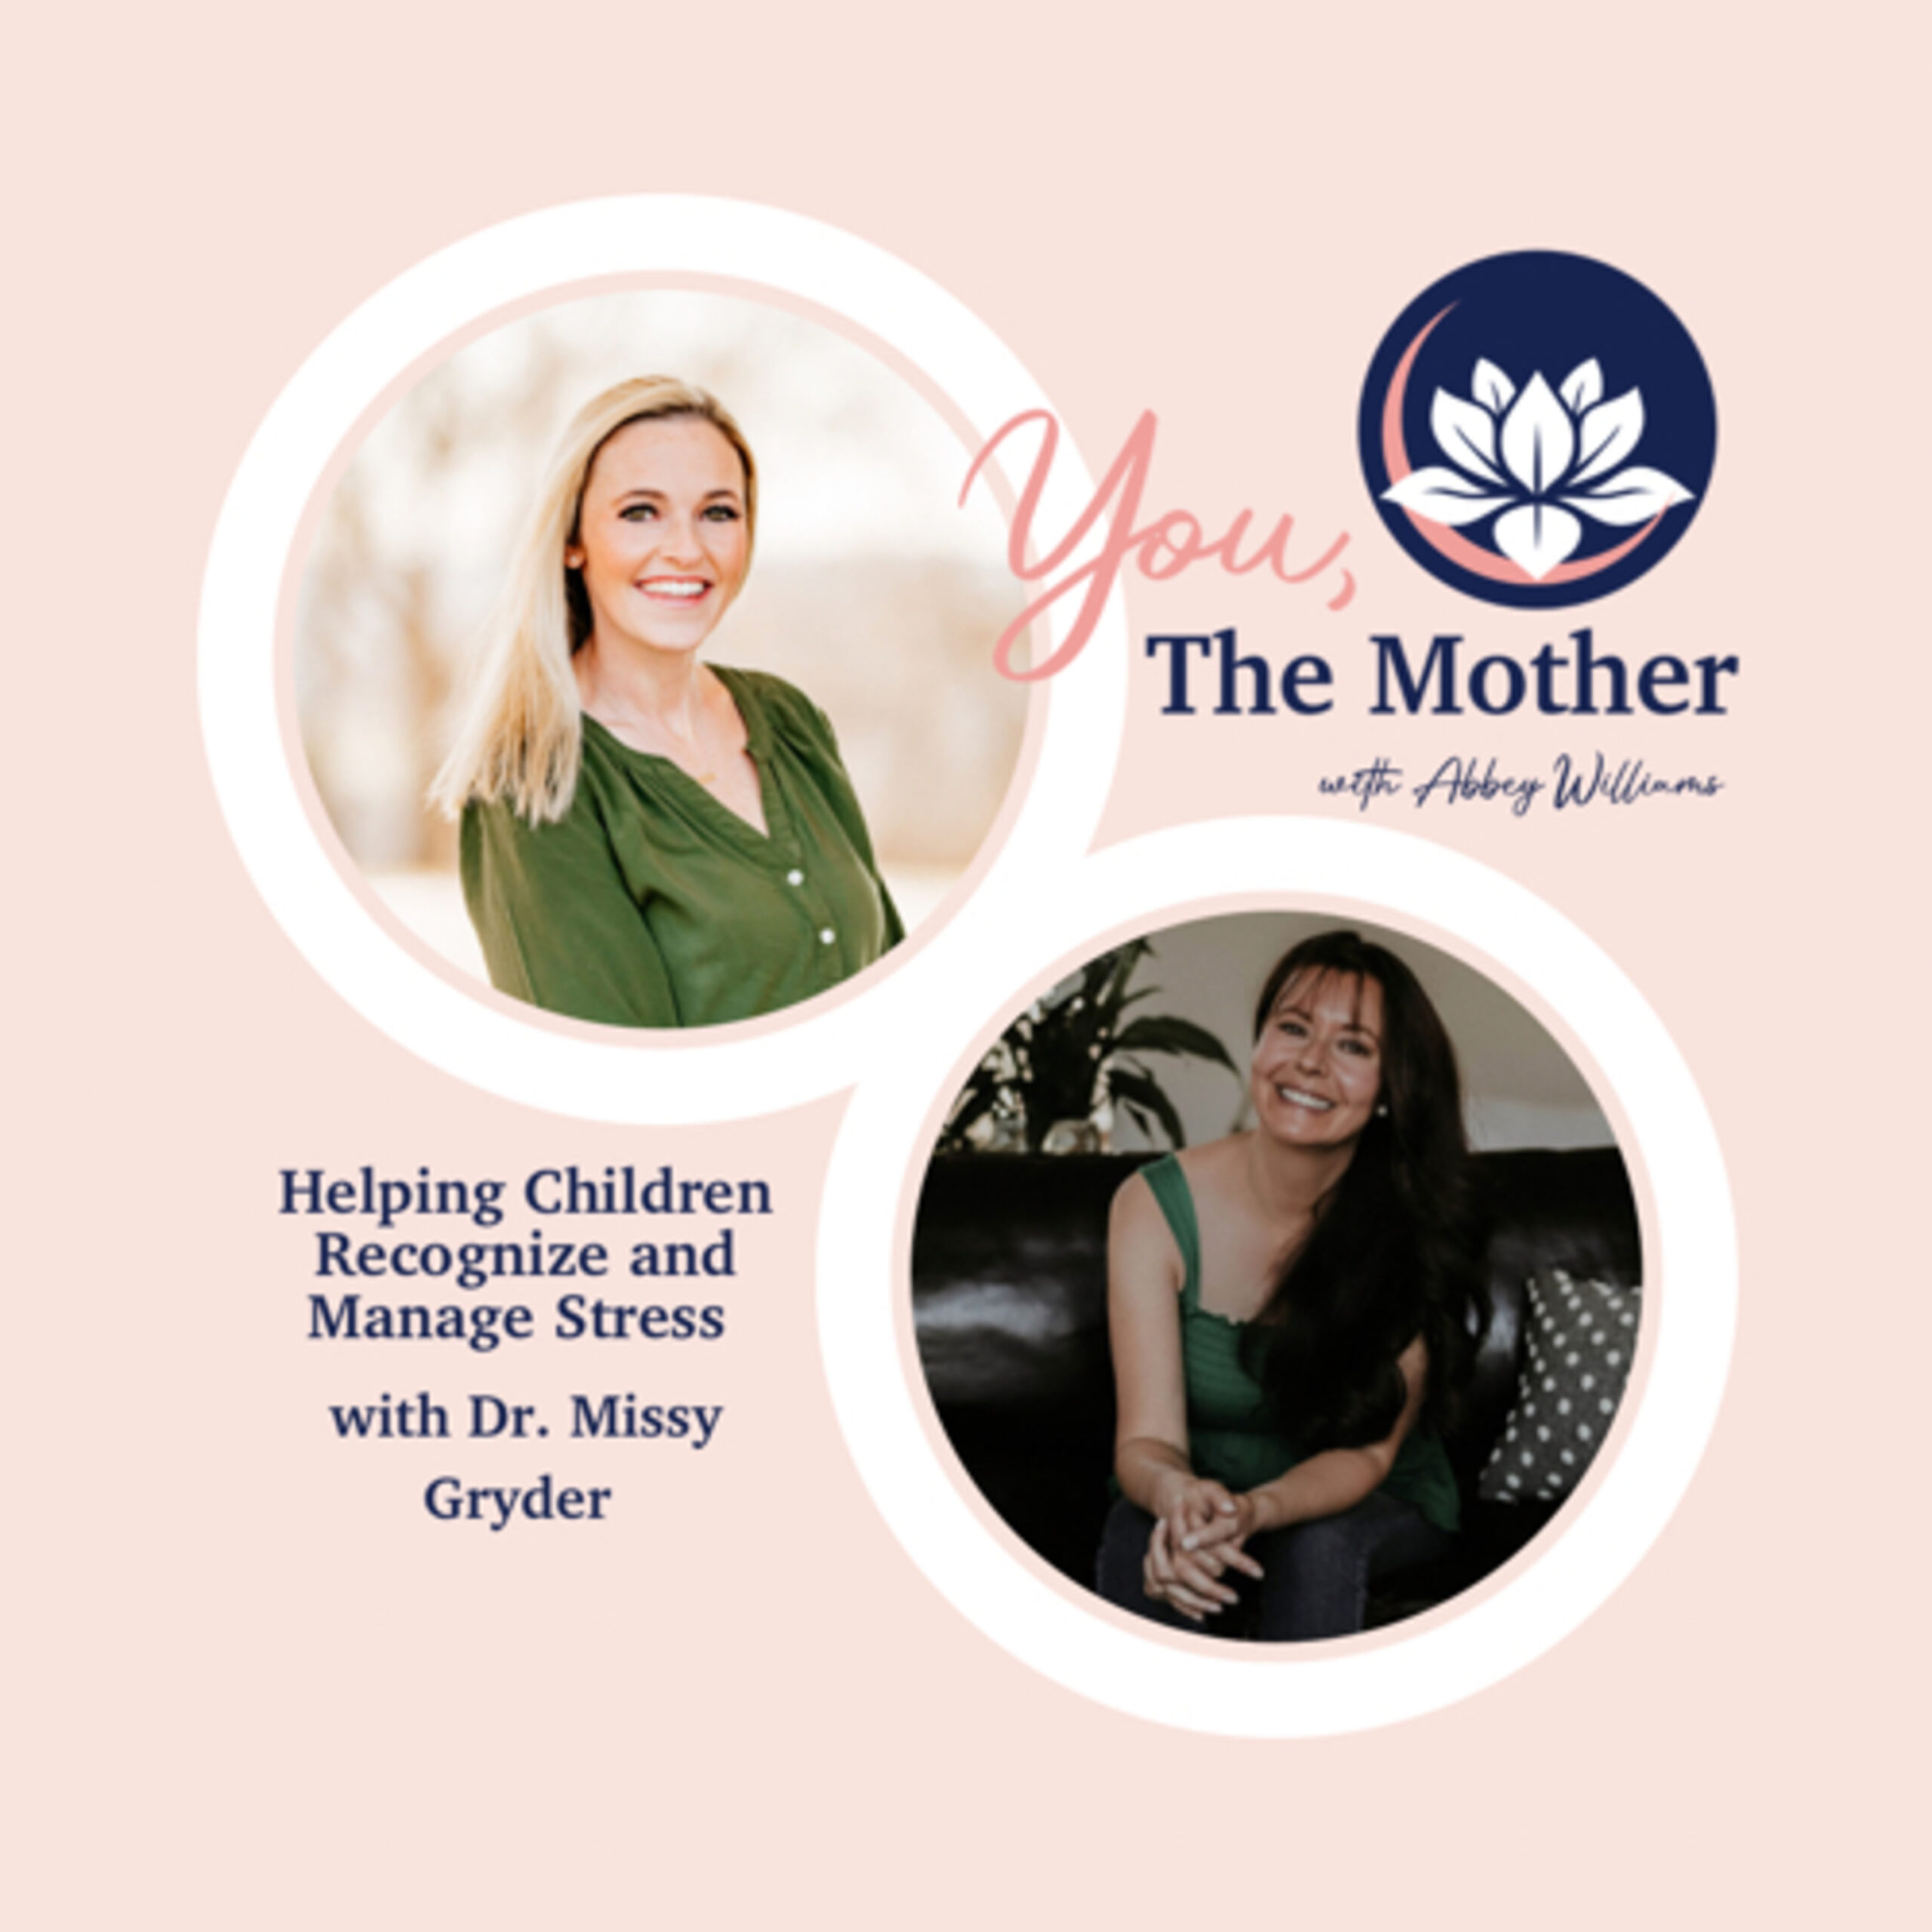 Helping Children Recognize and Manage Stress with Dr. Missy Gryder